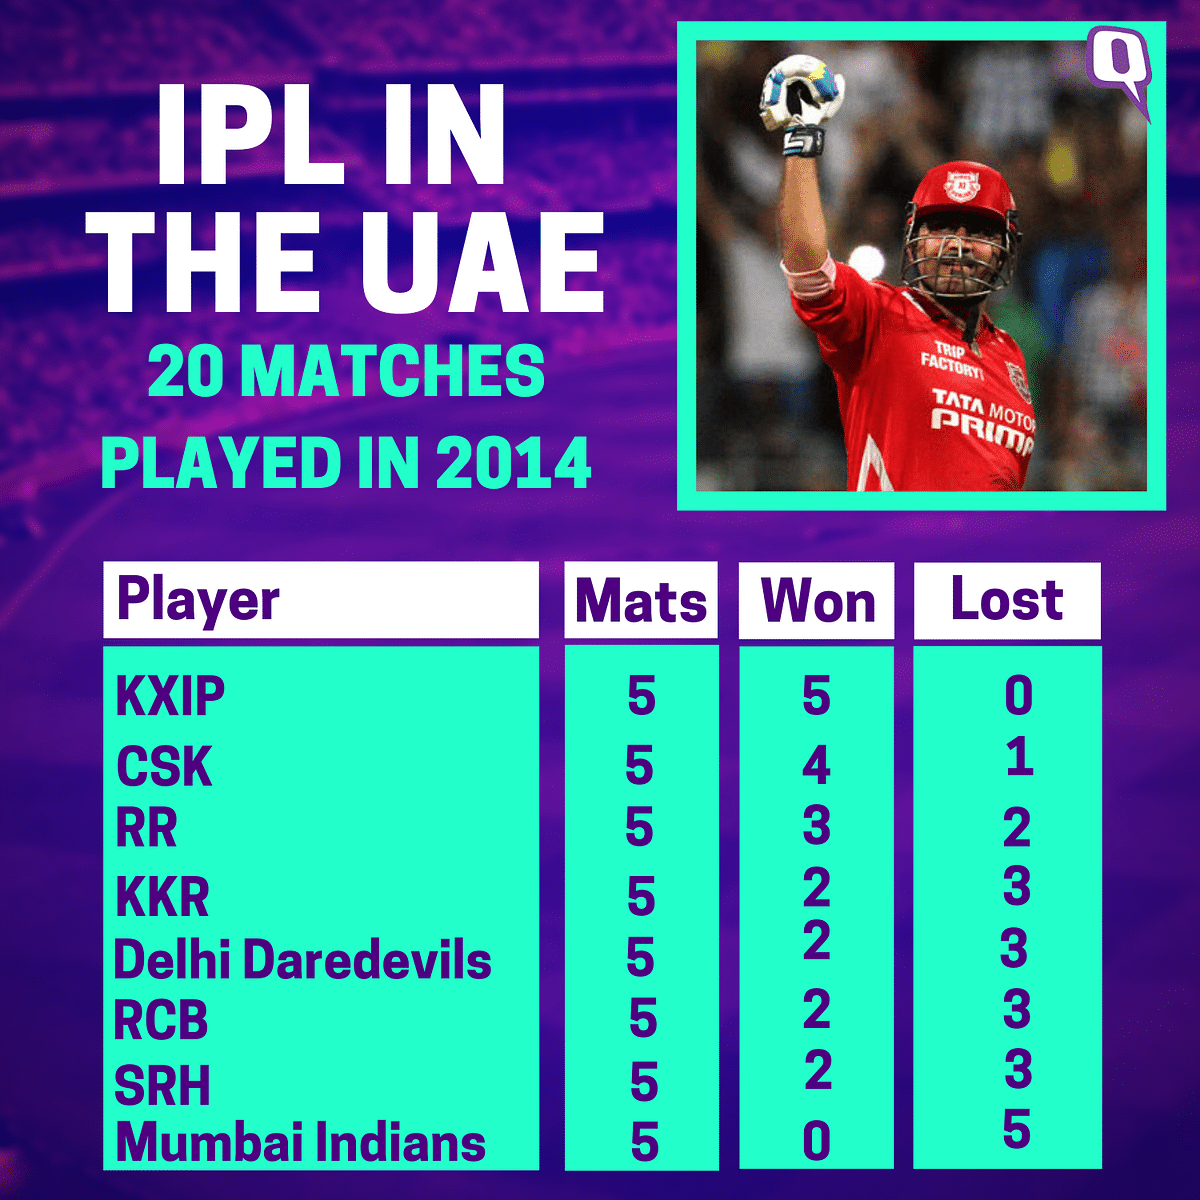 Who were the top performers when the IPL was last played in the UAE?